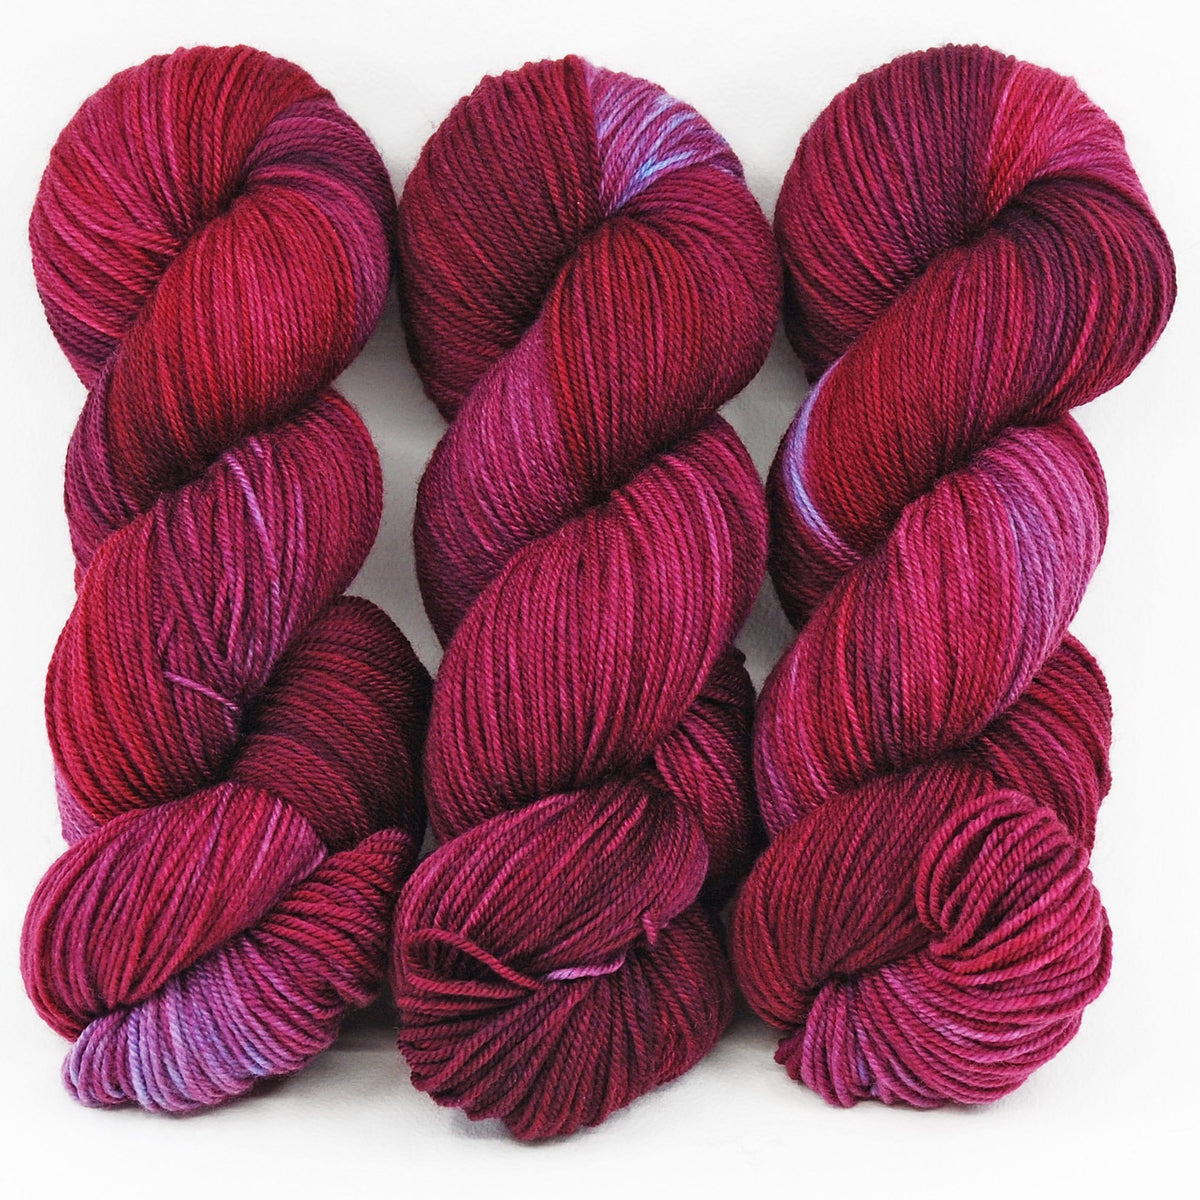 Beaujolais Nouveau in Fingering / Sock Weight